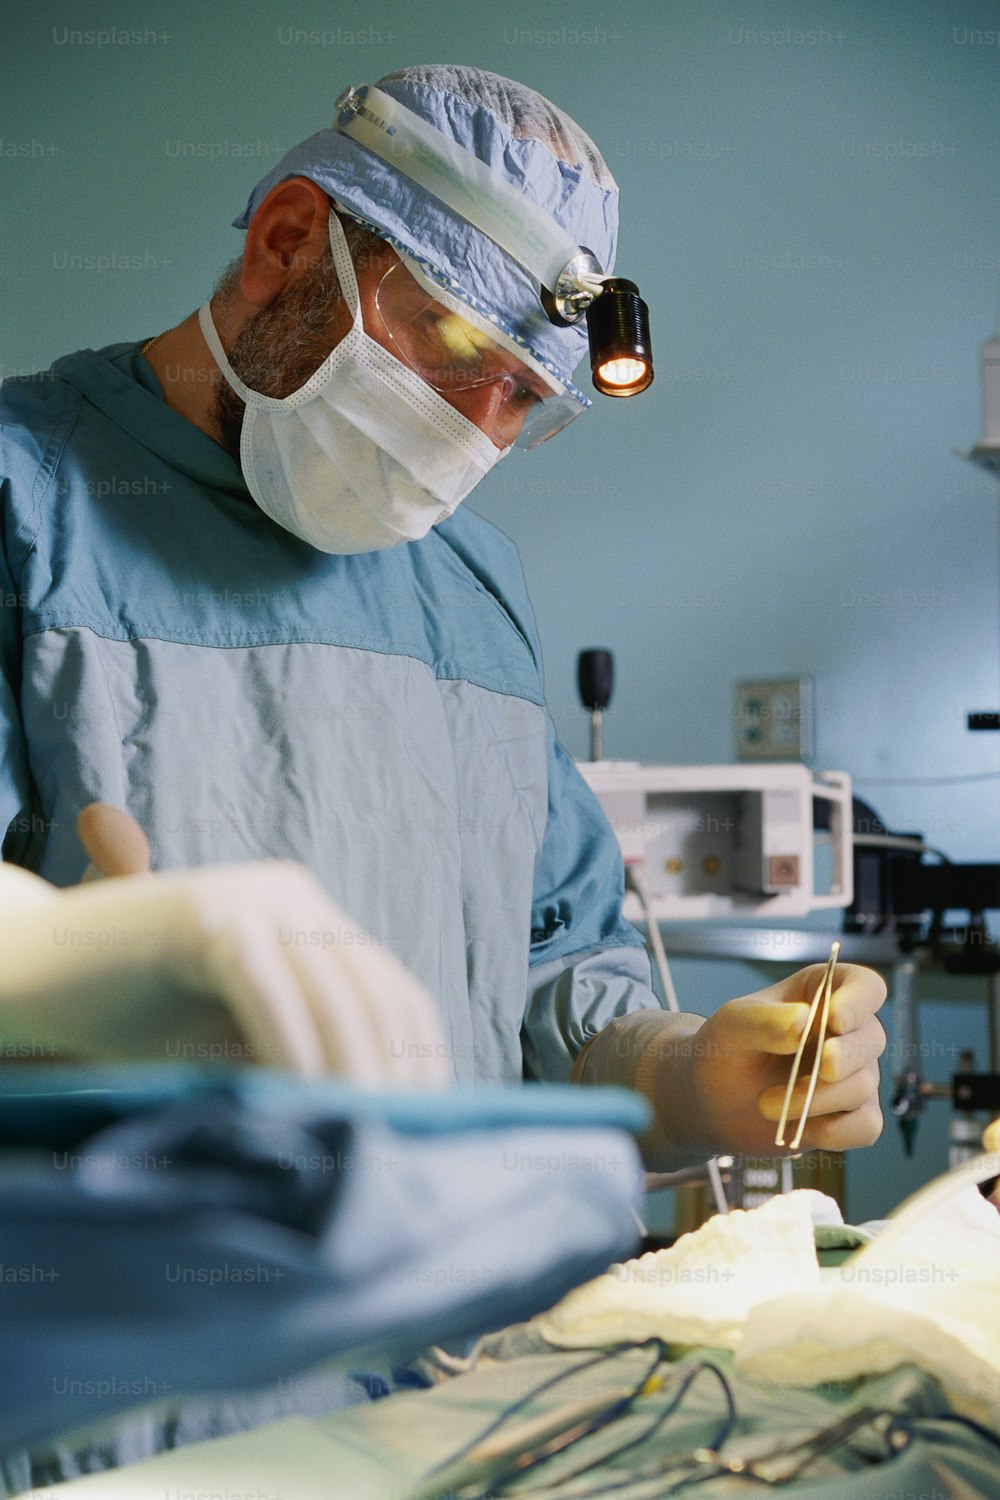 a man in a surgical gown is performing surgery